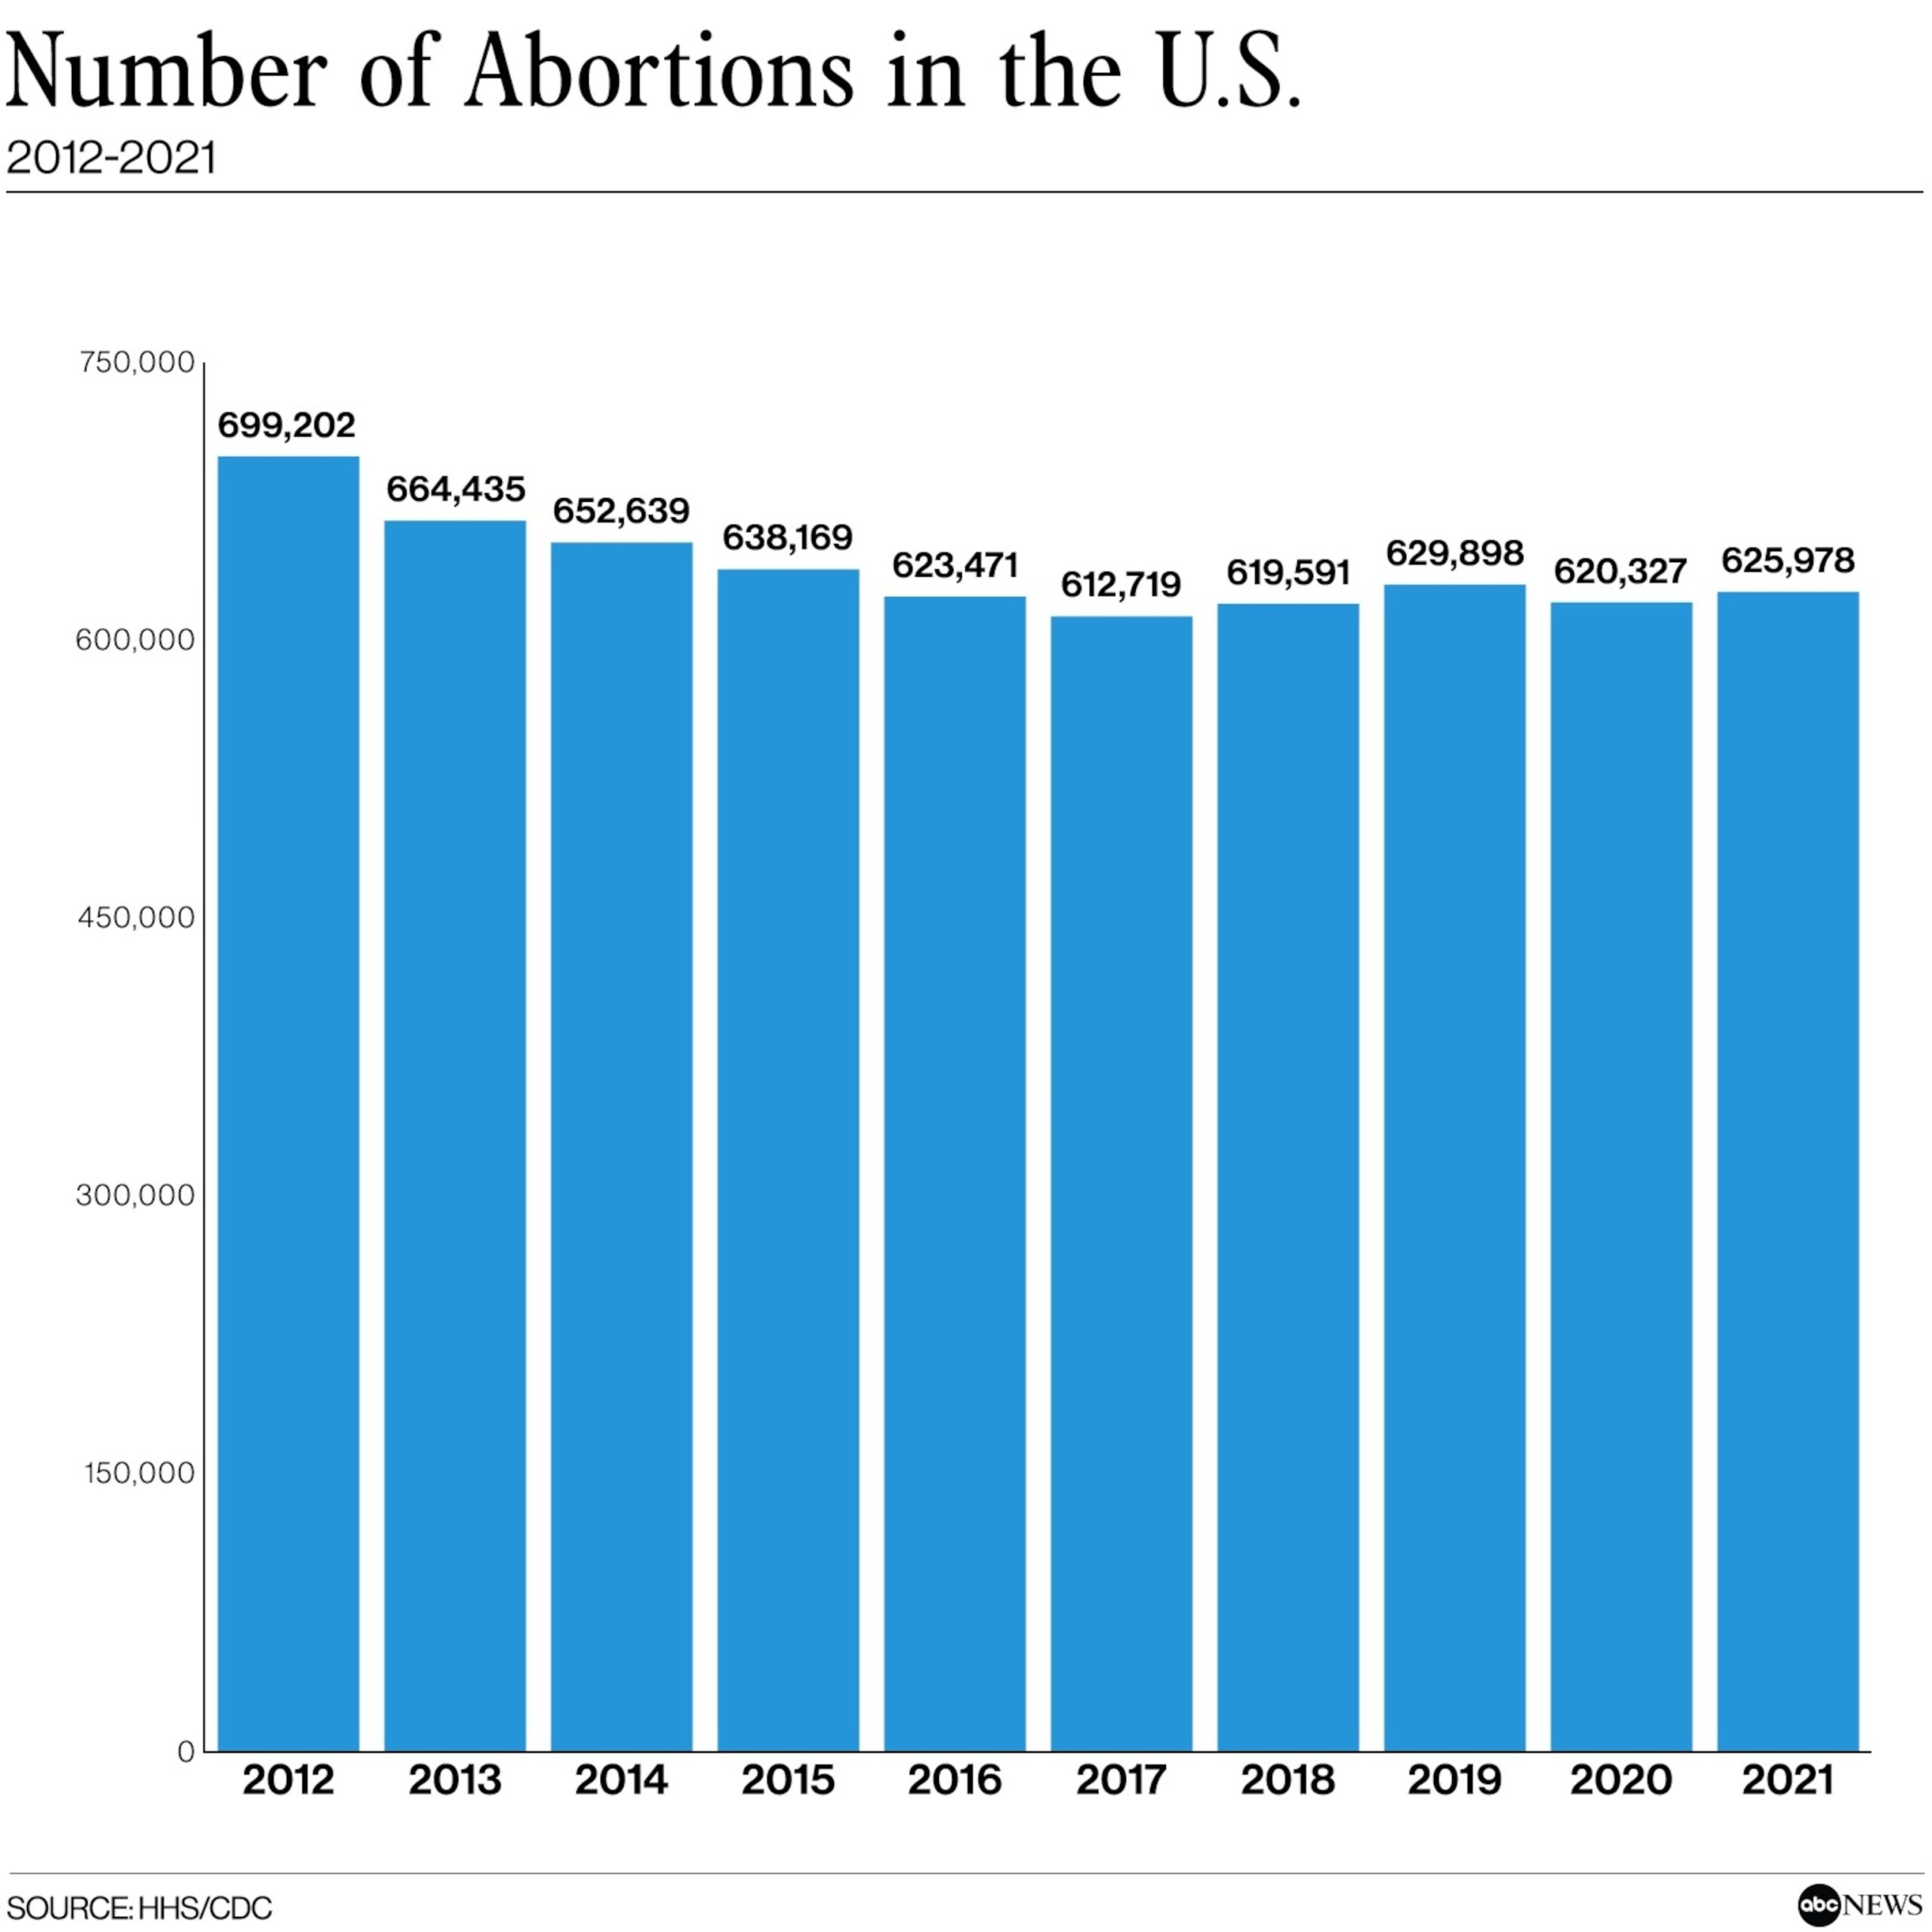 PHOTO: Number of Abortions in the U.S. 2012-2021